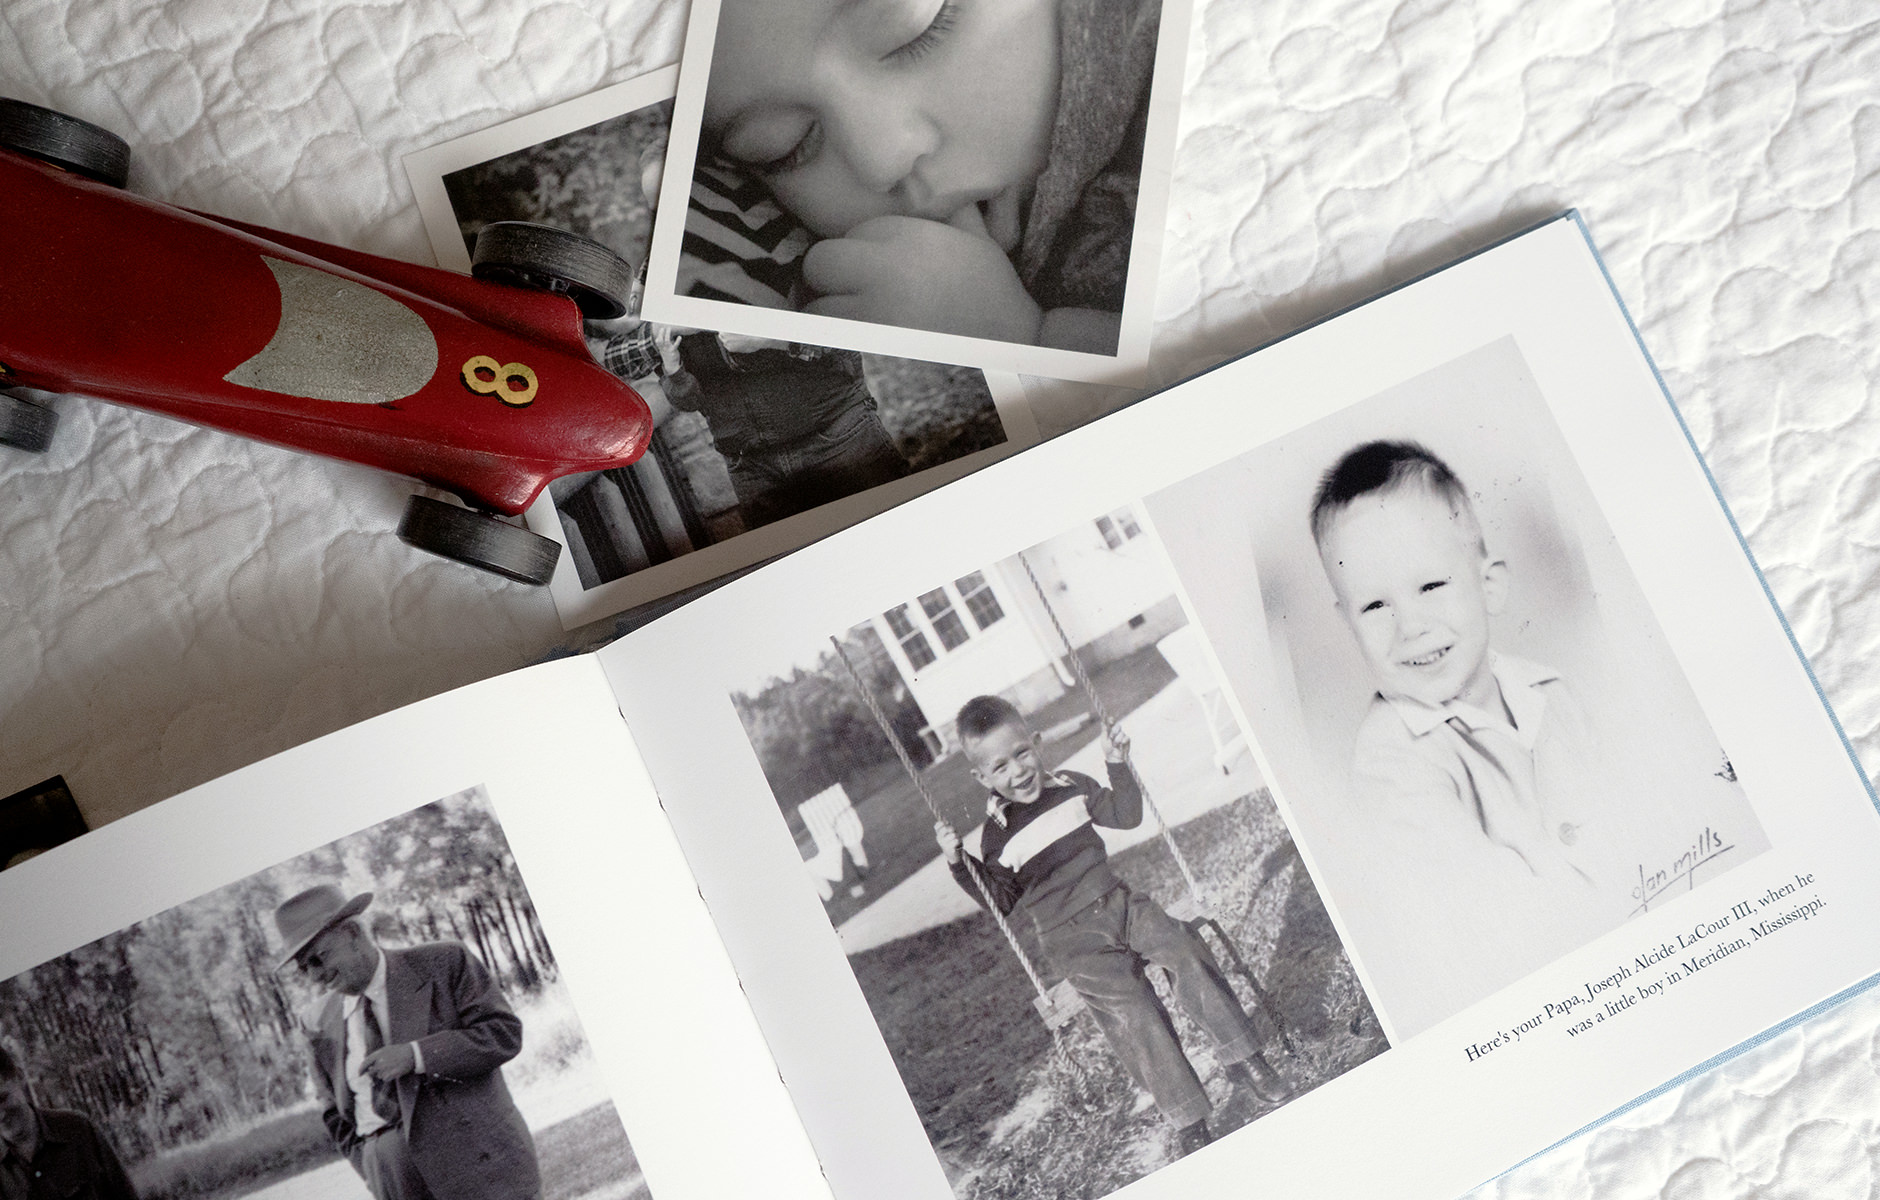 Photo Book with photographs and an old toy car